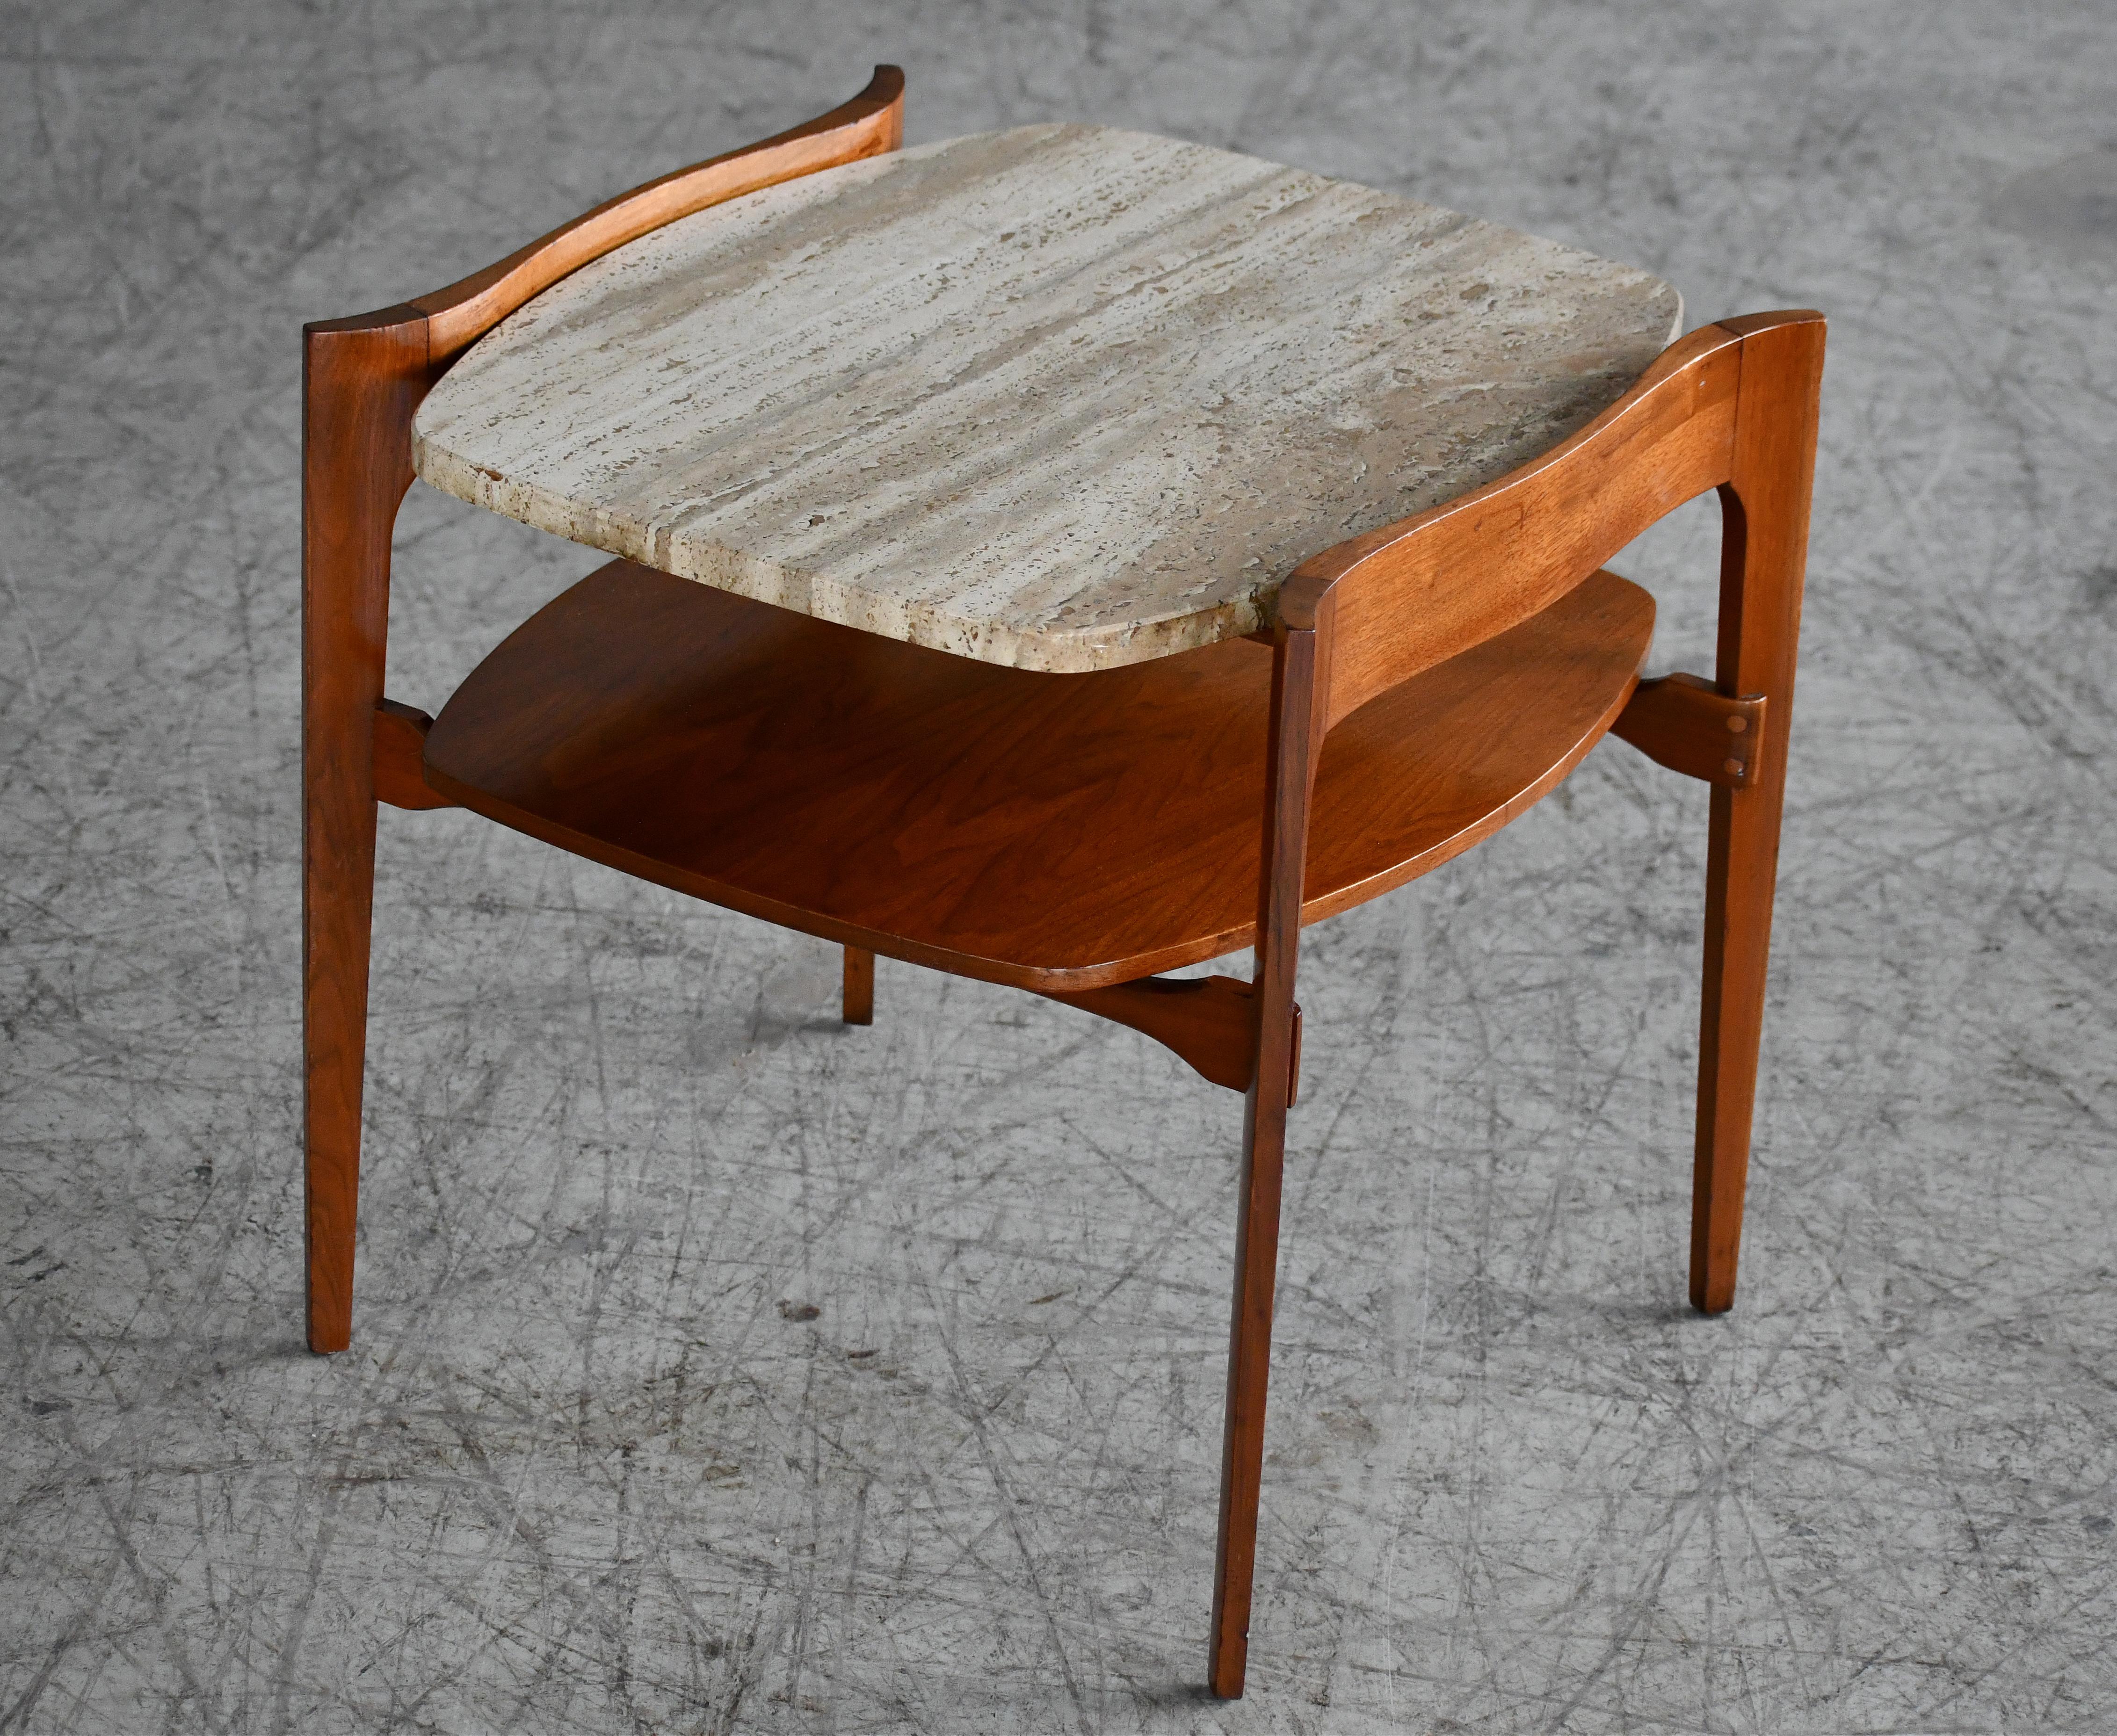 Fabulous boat tail shaped side or end table by M. Singer and Sons produced in the 1950s. Very sculptural walnut frame with 